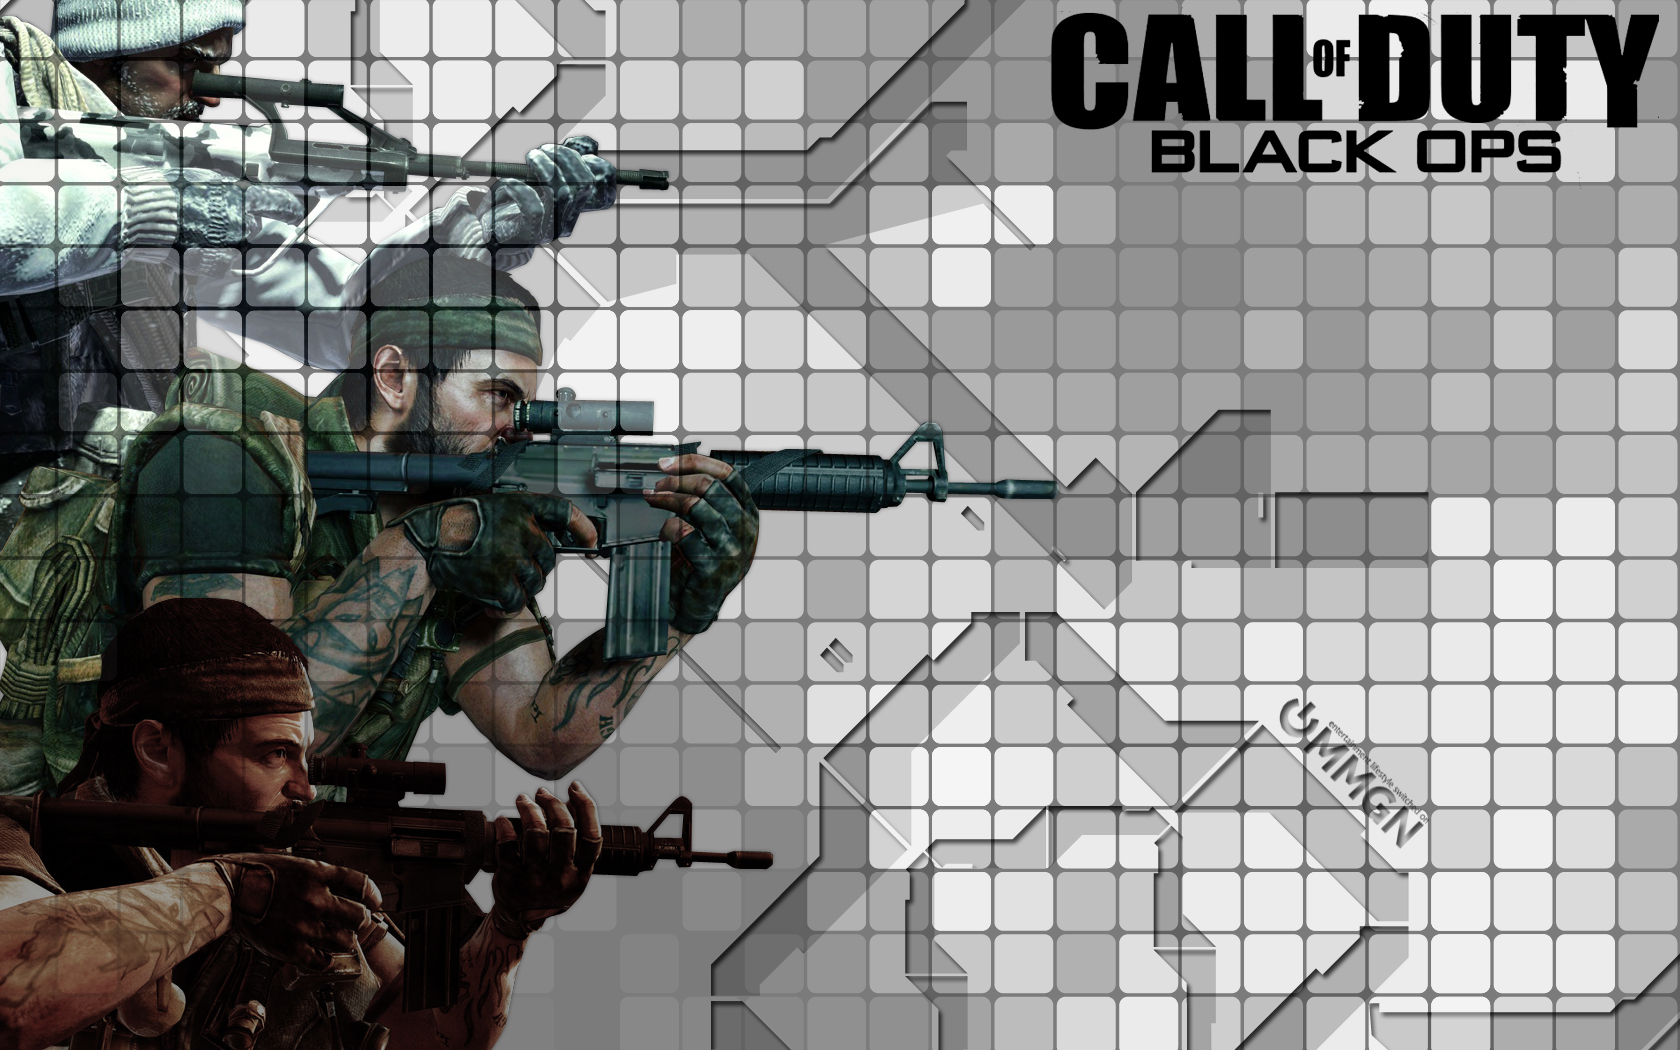 Call of Duty Black Ops Wallpapers   MMGN Blogs